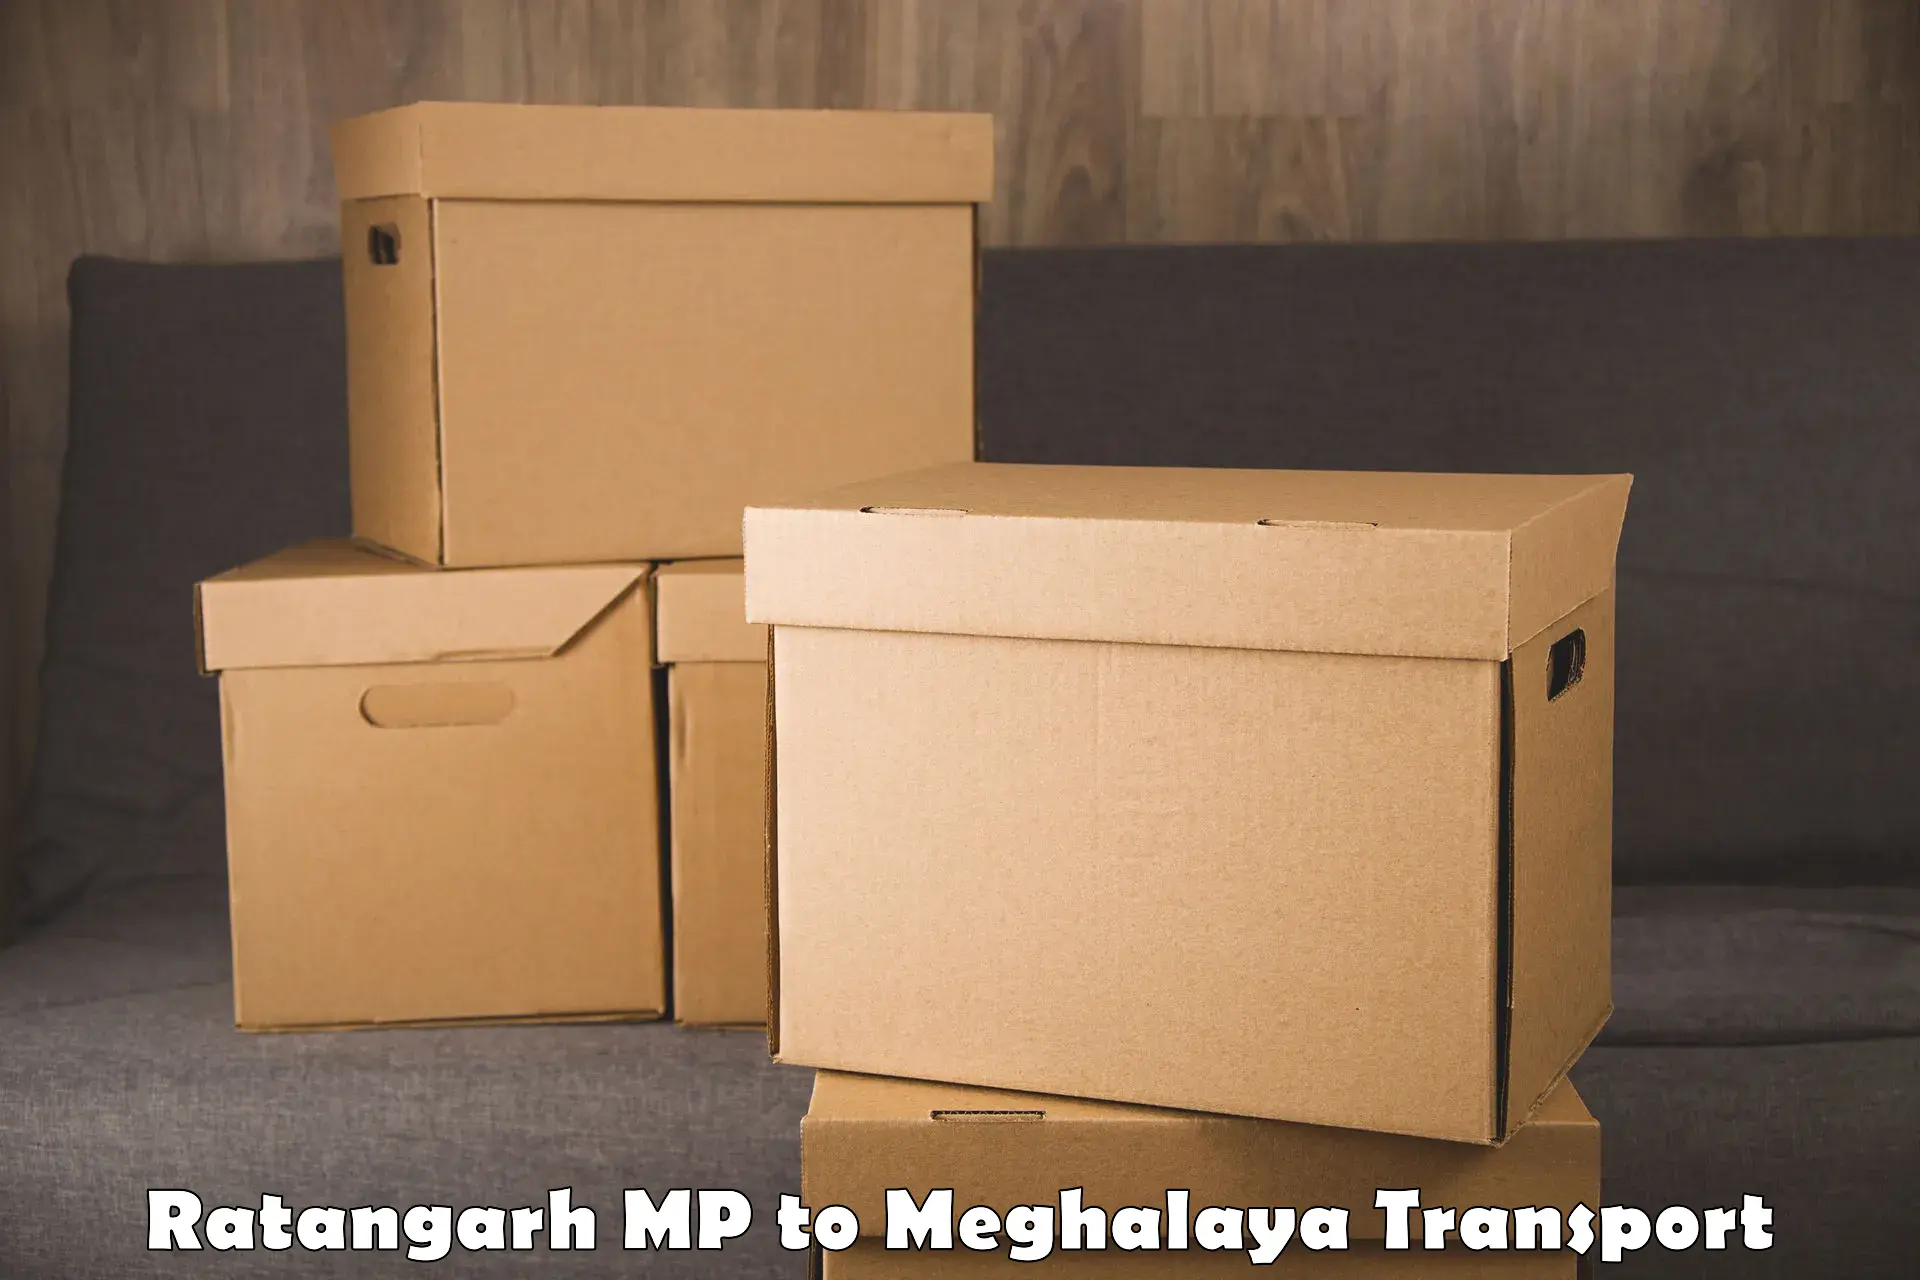 Online transport booking Ratangarh MP to Shillong